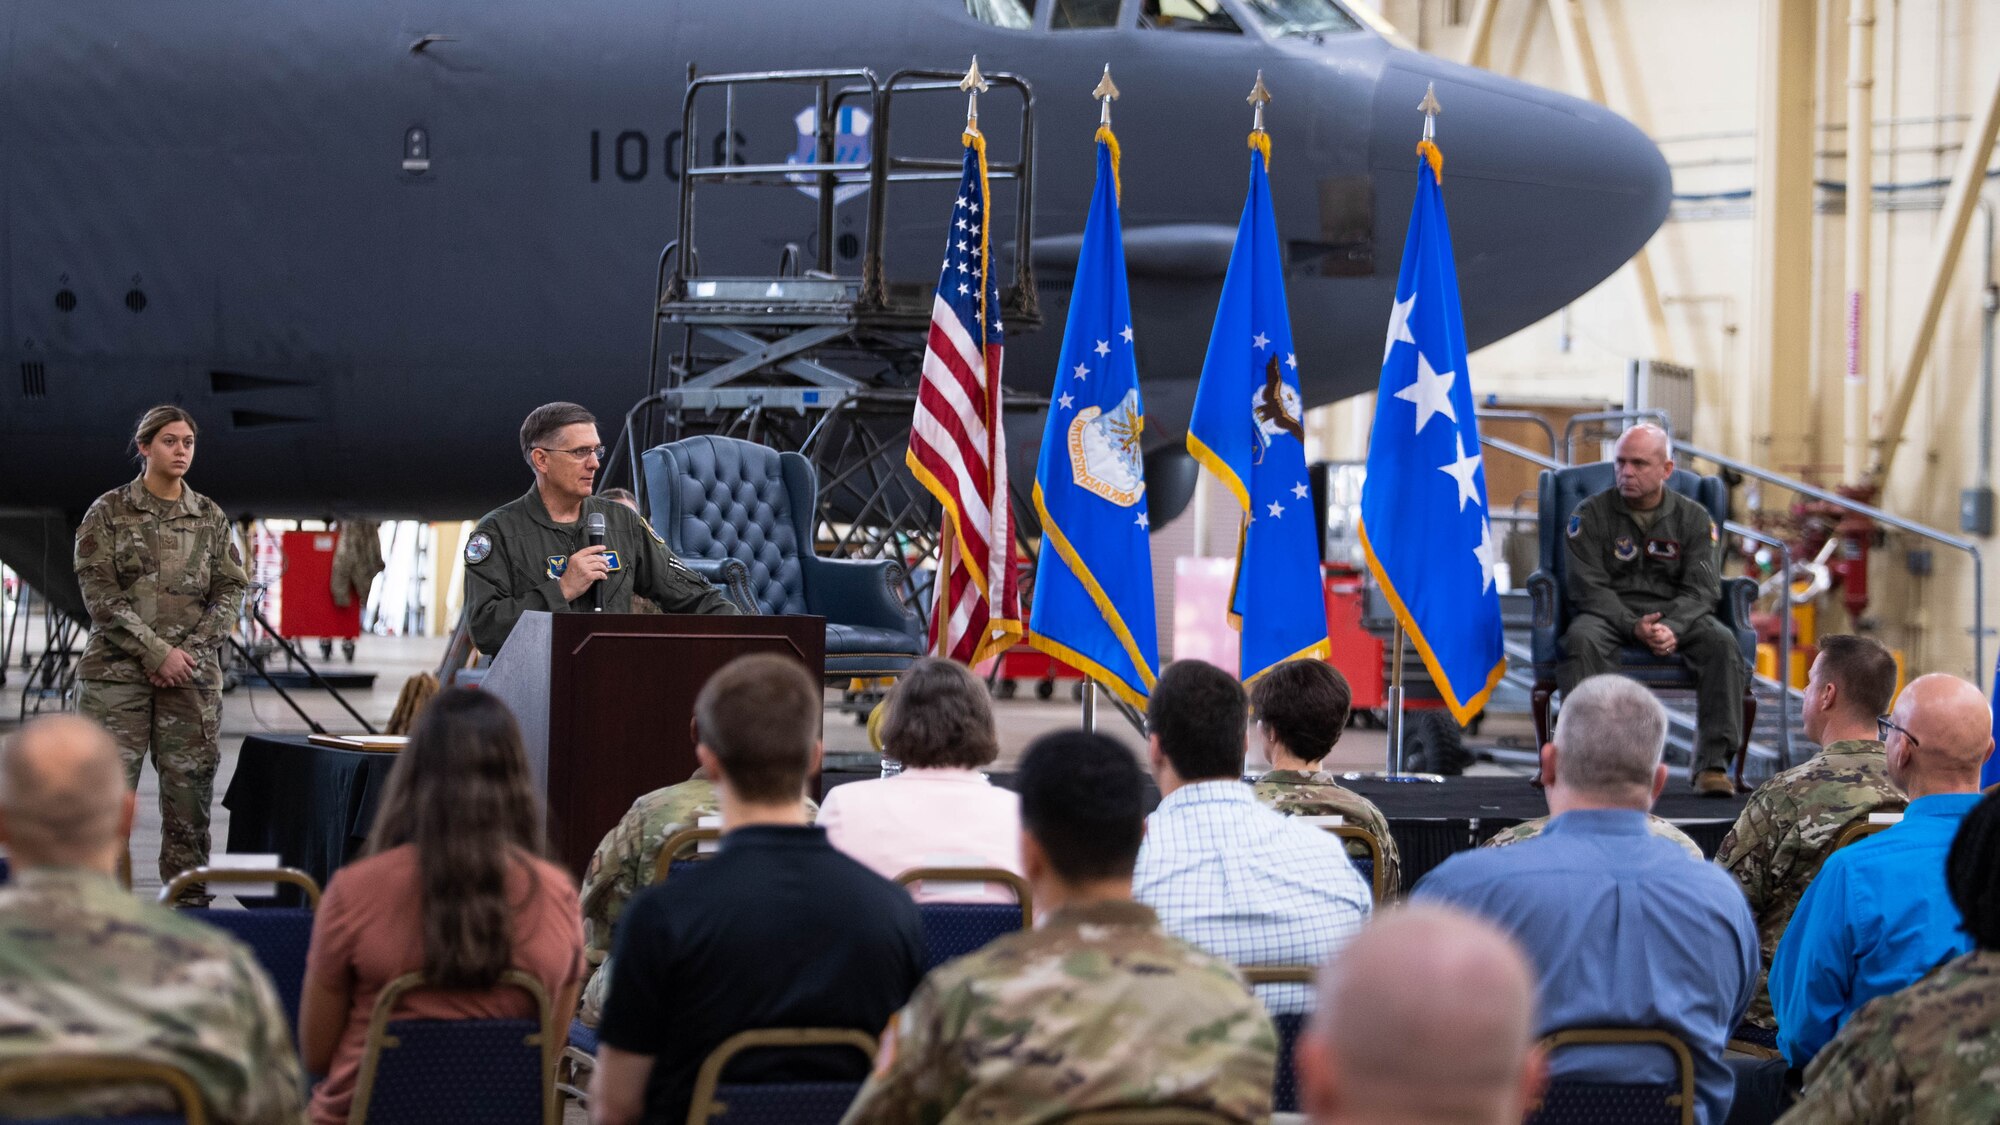 Gen. Timothy M. Ray, Air Force Global Strike Command commander, makes remarks during the U.S. Air Force's Nuclear Command, Control and Communications Center's deactivation ceremony at Barksdale Air Force Base, Louisiana, June 4, 2021. Originally stood up by AFGSC in 2017, the AFNC3 Center was formally deactivated June 4. (U.S. Air Force photo by Senior Airman Jacob B. Wrightsman)